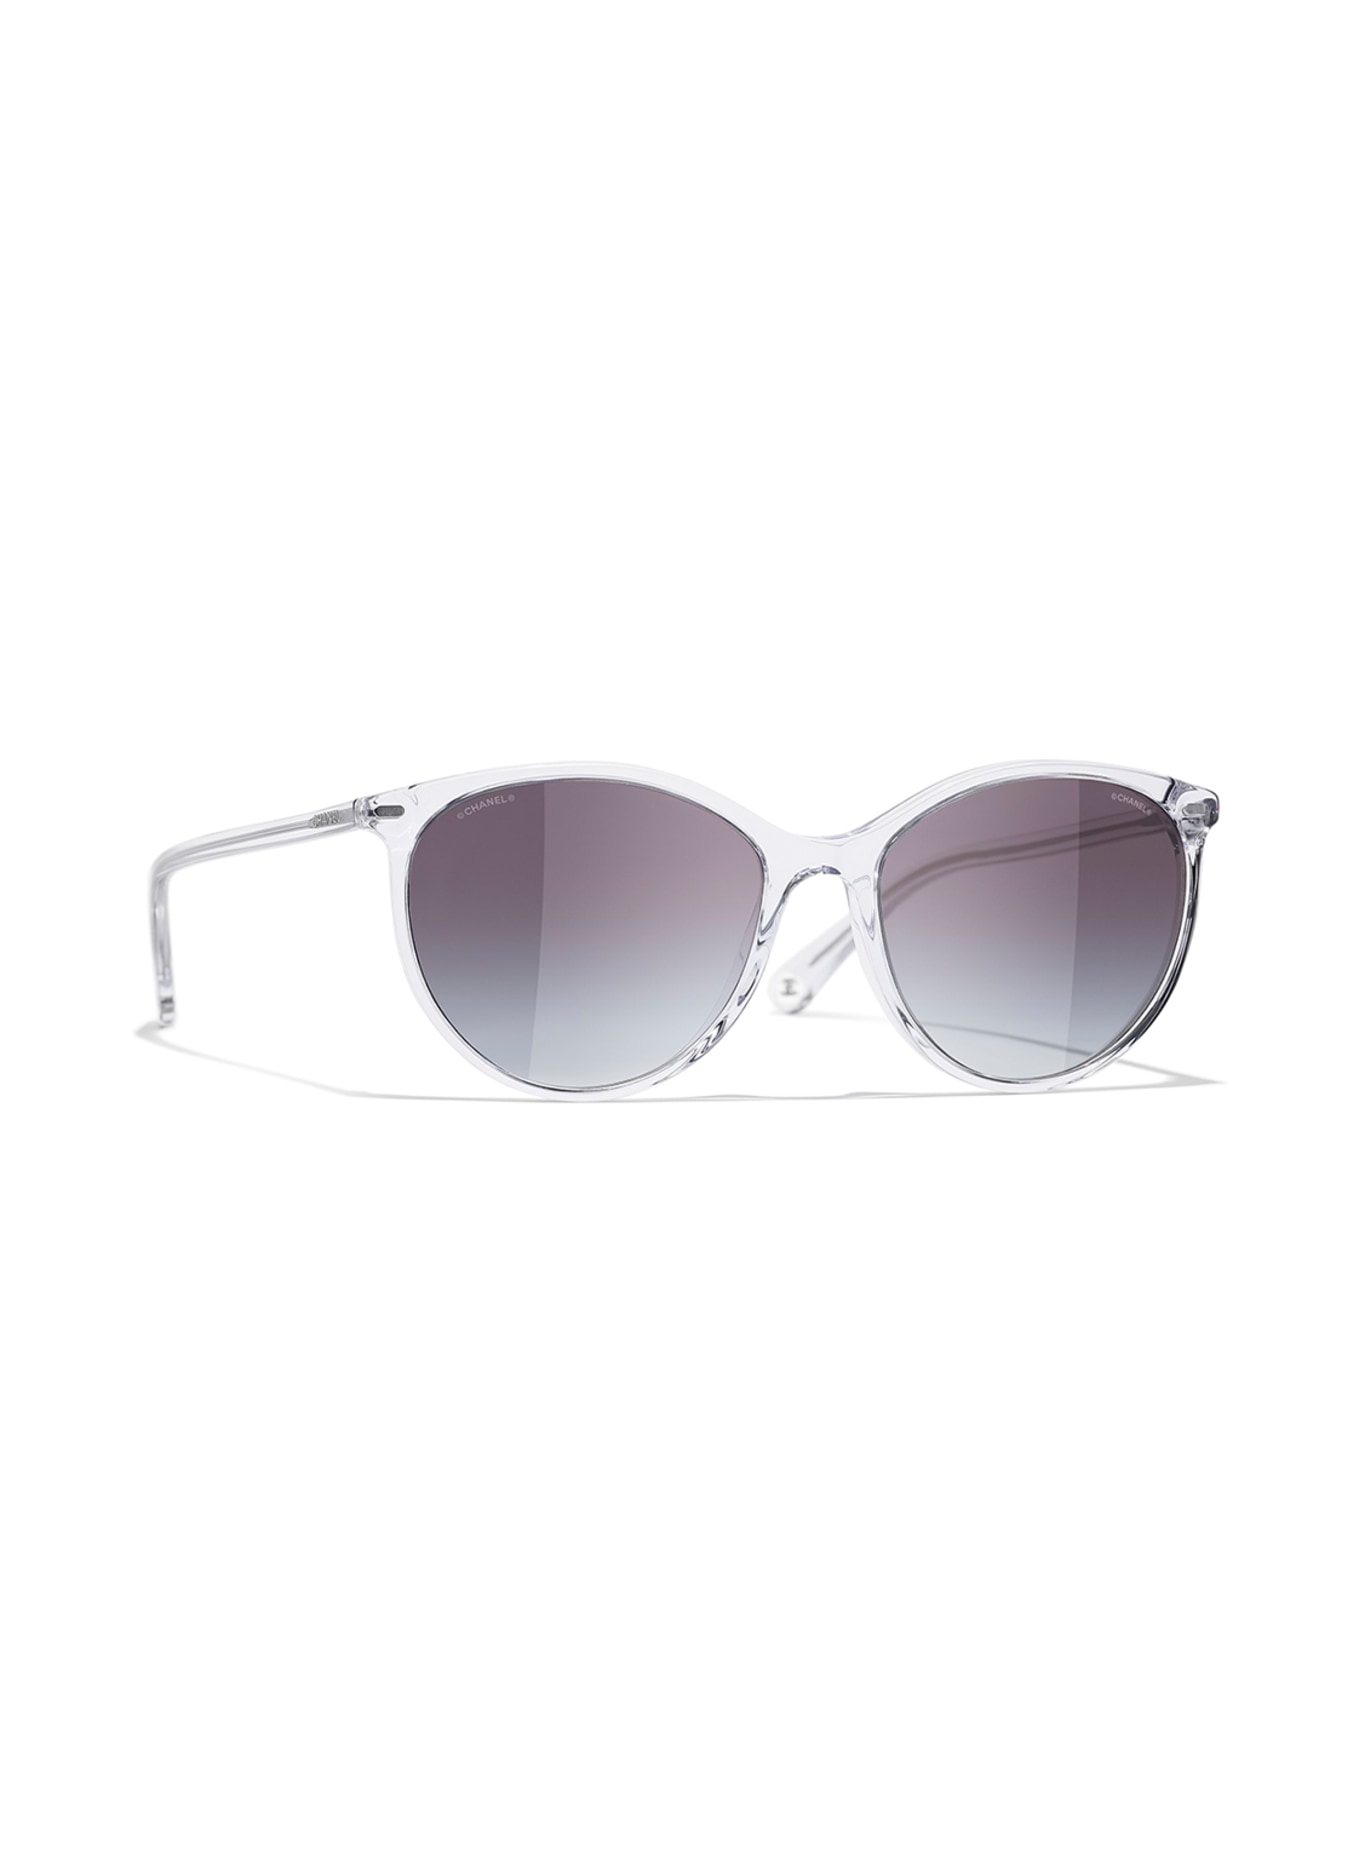 CHANEL Butterfly sunglasses, Color: C660S6 - TRANSPARENT/ GRAY GRADIENT (Image 1)